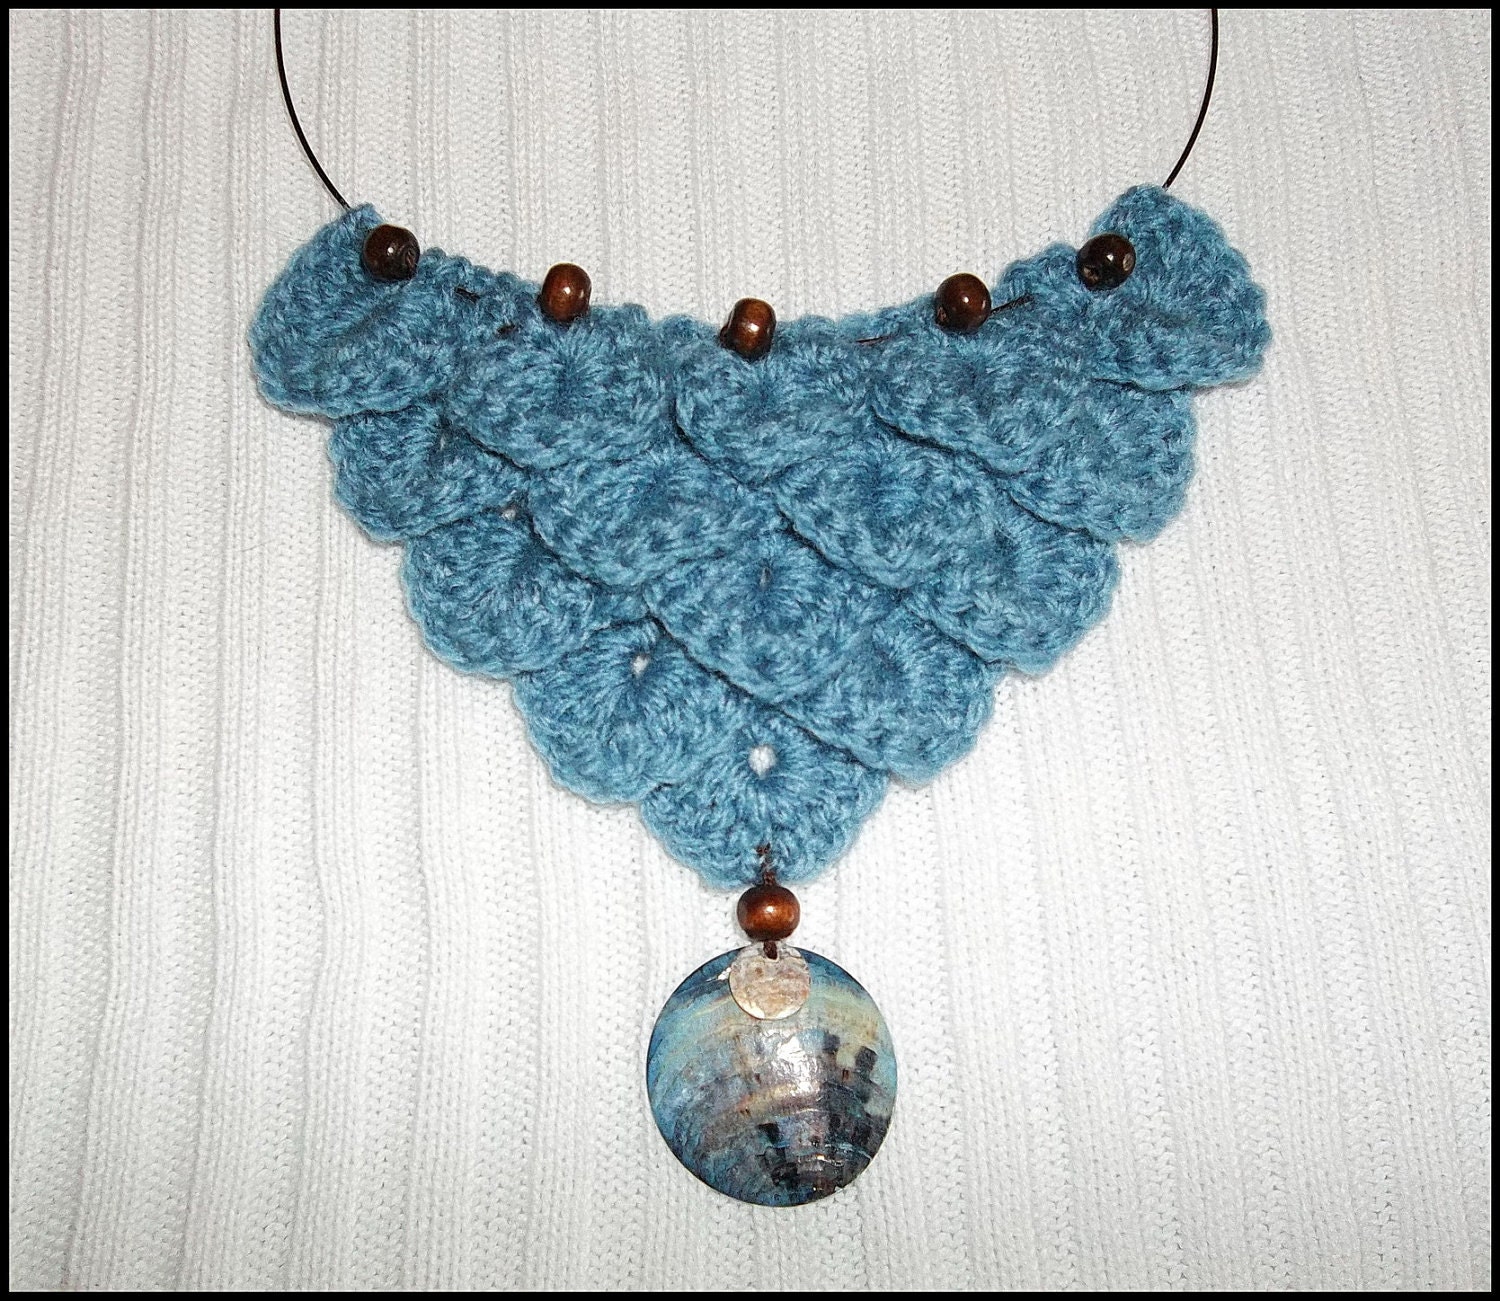 Celtic, Crochet, Crocodile Stitch, Urban Chic, Blue Bib Necklace with beads and shell pendant